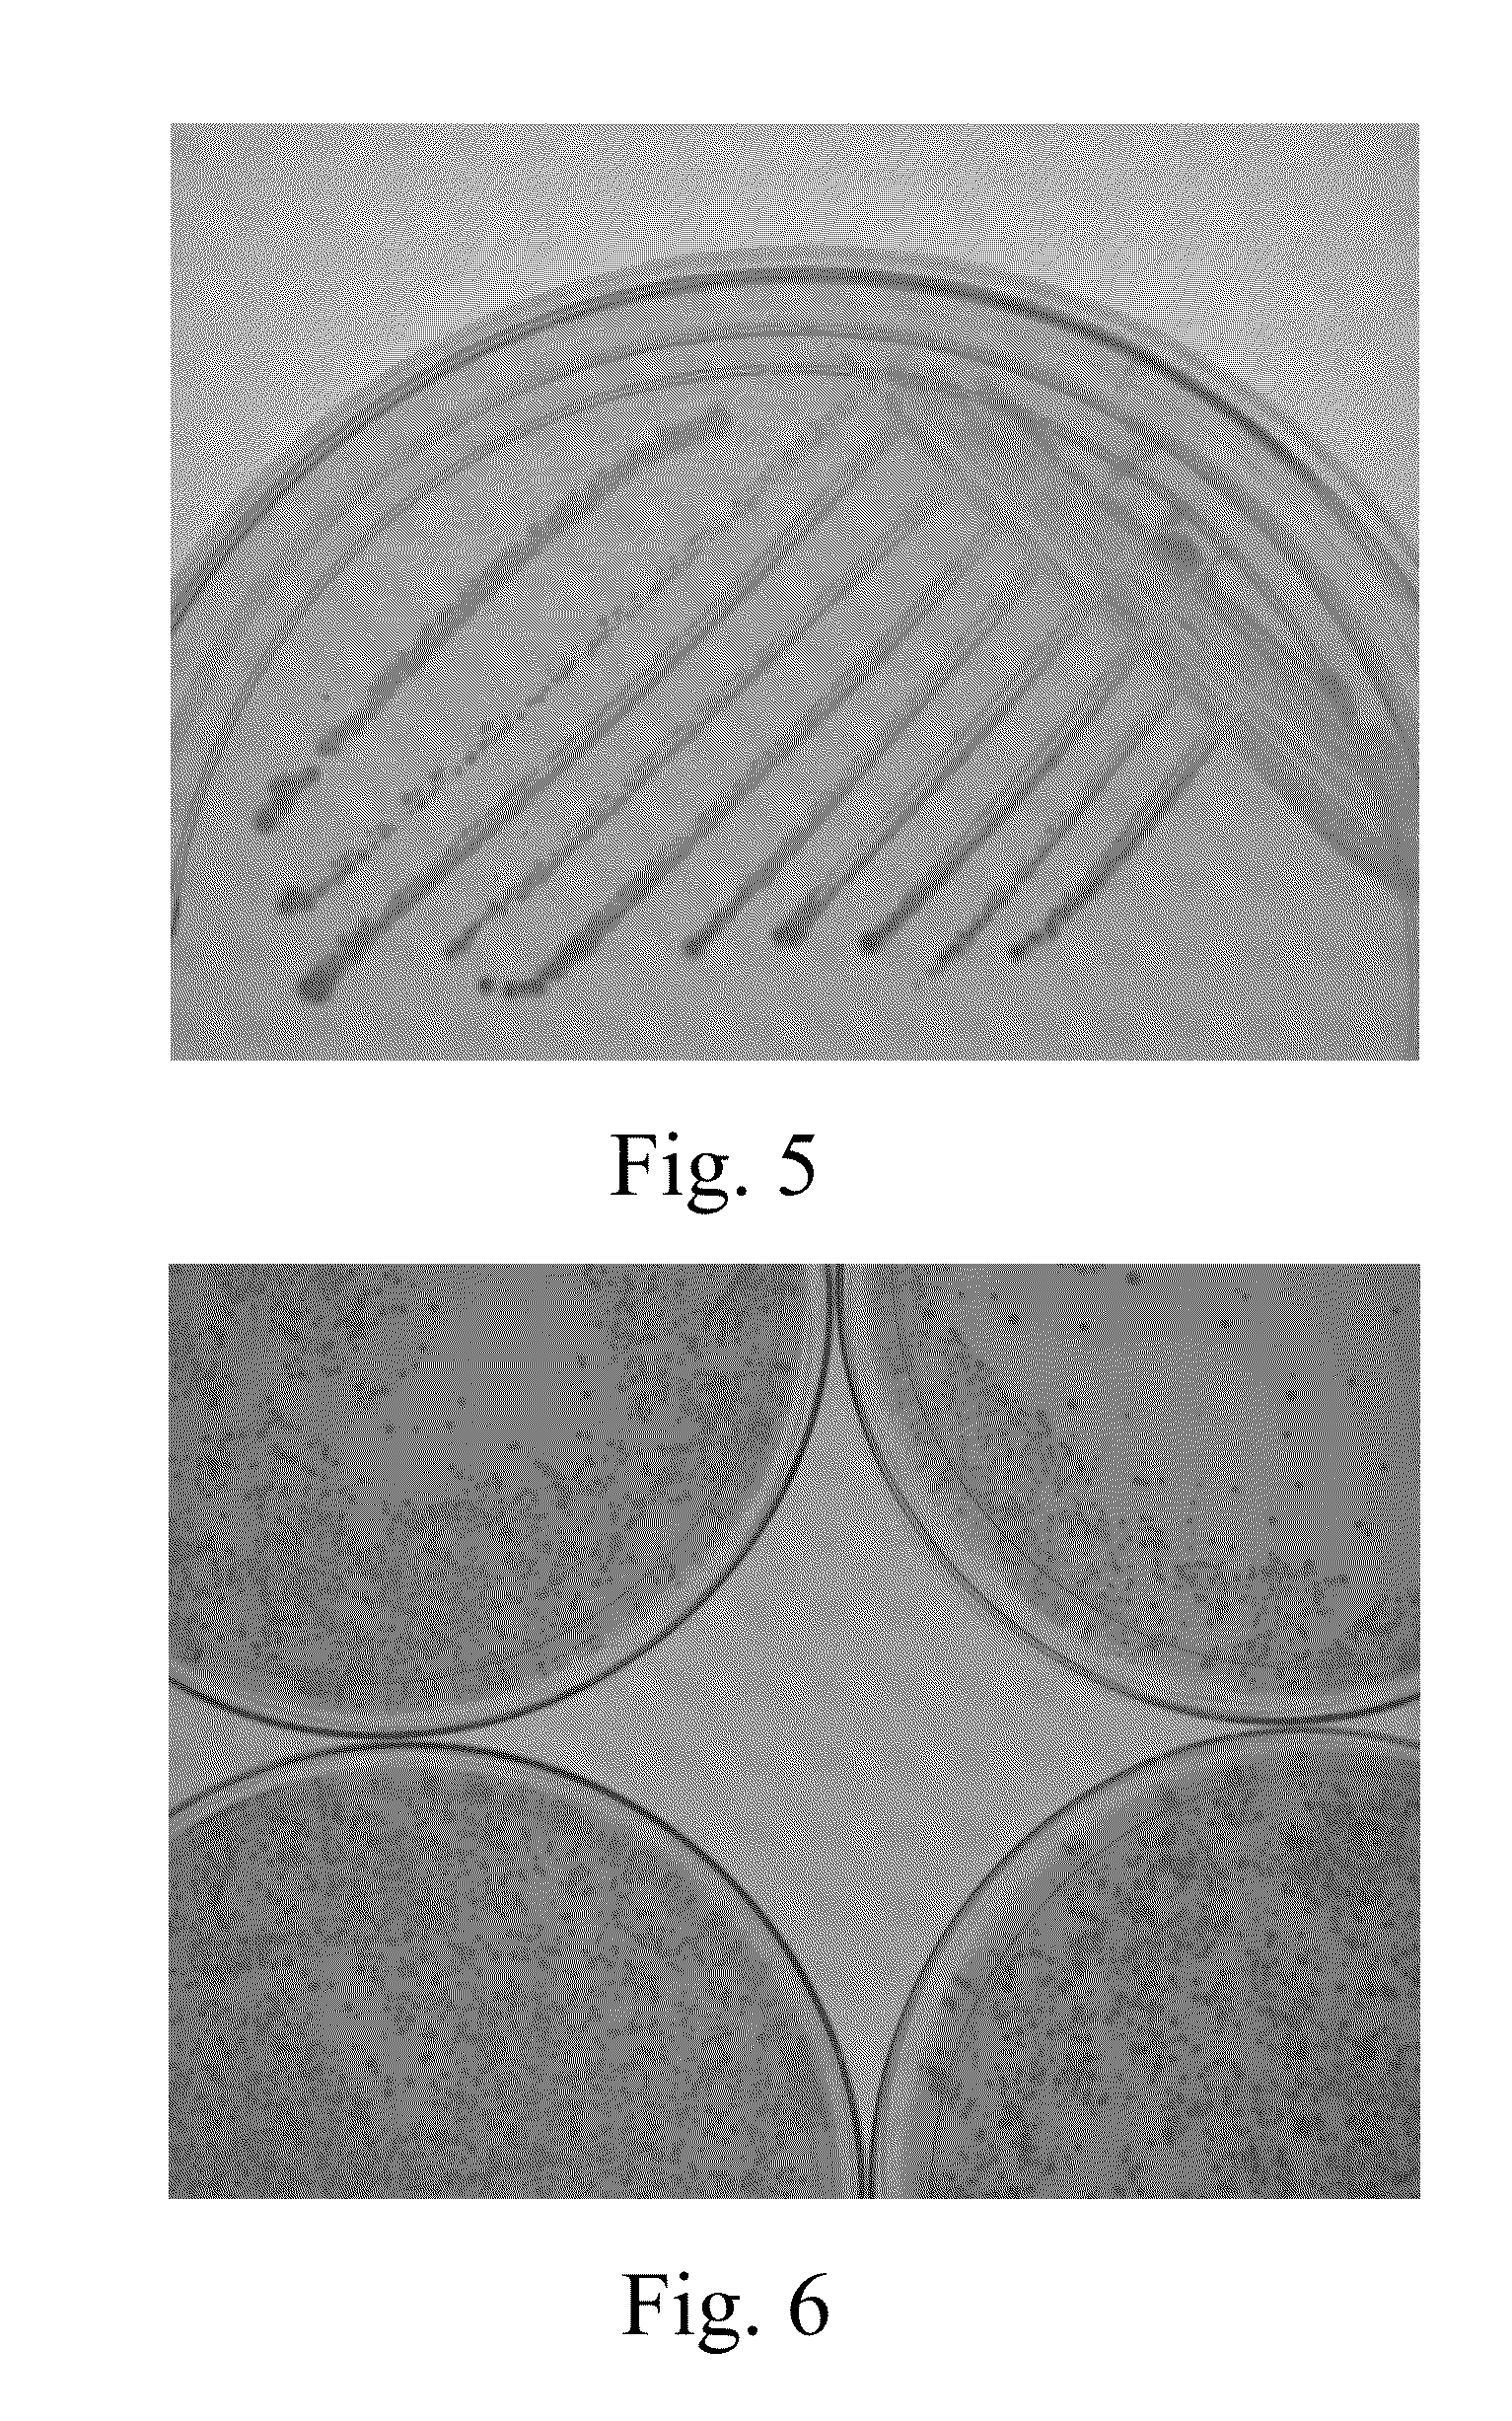 Non-toxic solvent for chromogenic substrate solution and uses thereof